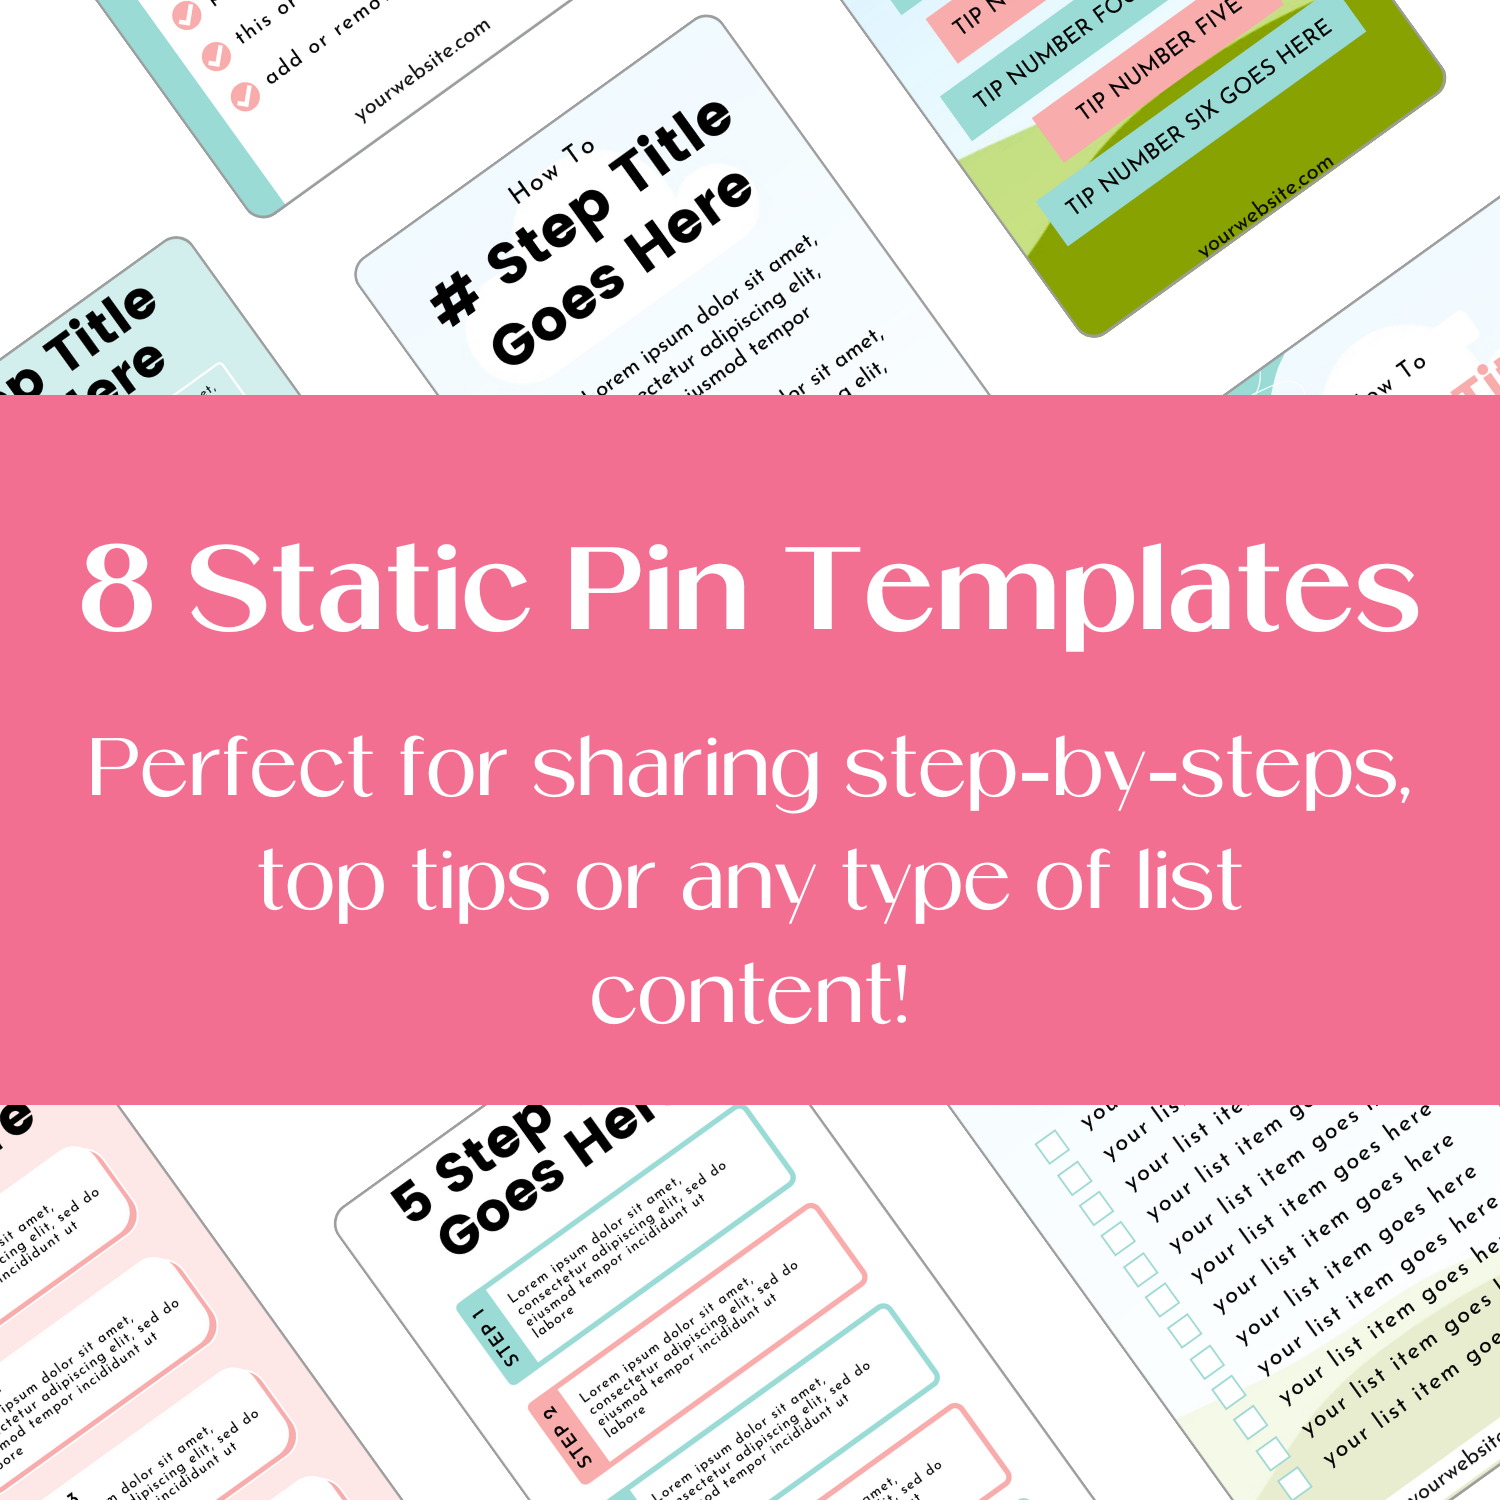 A grid mockup displaying the different Pinterest List Pin Templates designs.